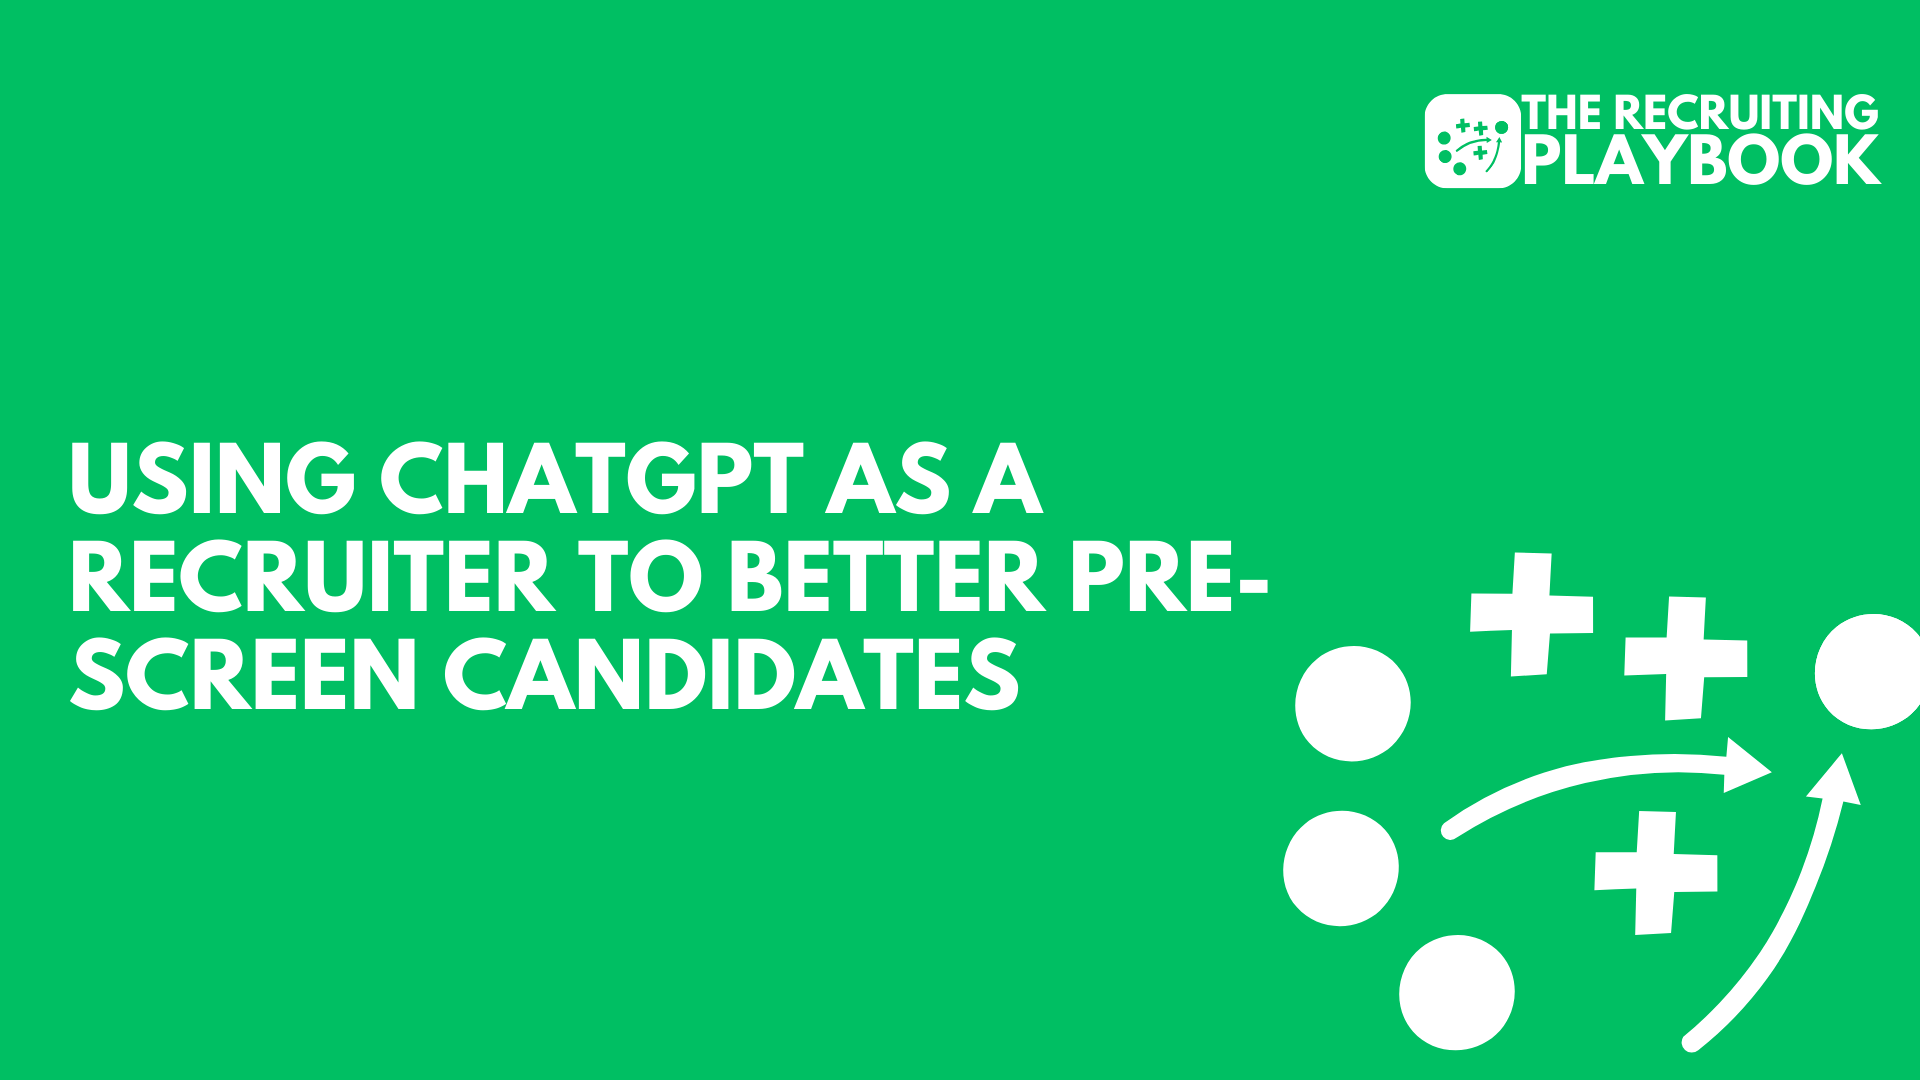 Using ChatGPT As A Recruiter to Better Pre-Screen Candidates